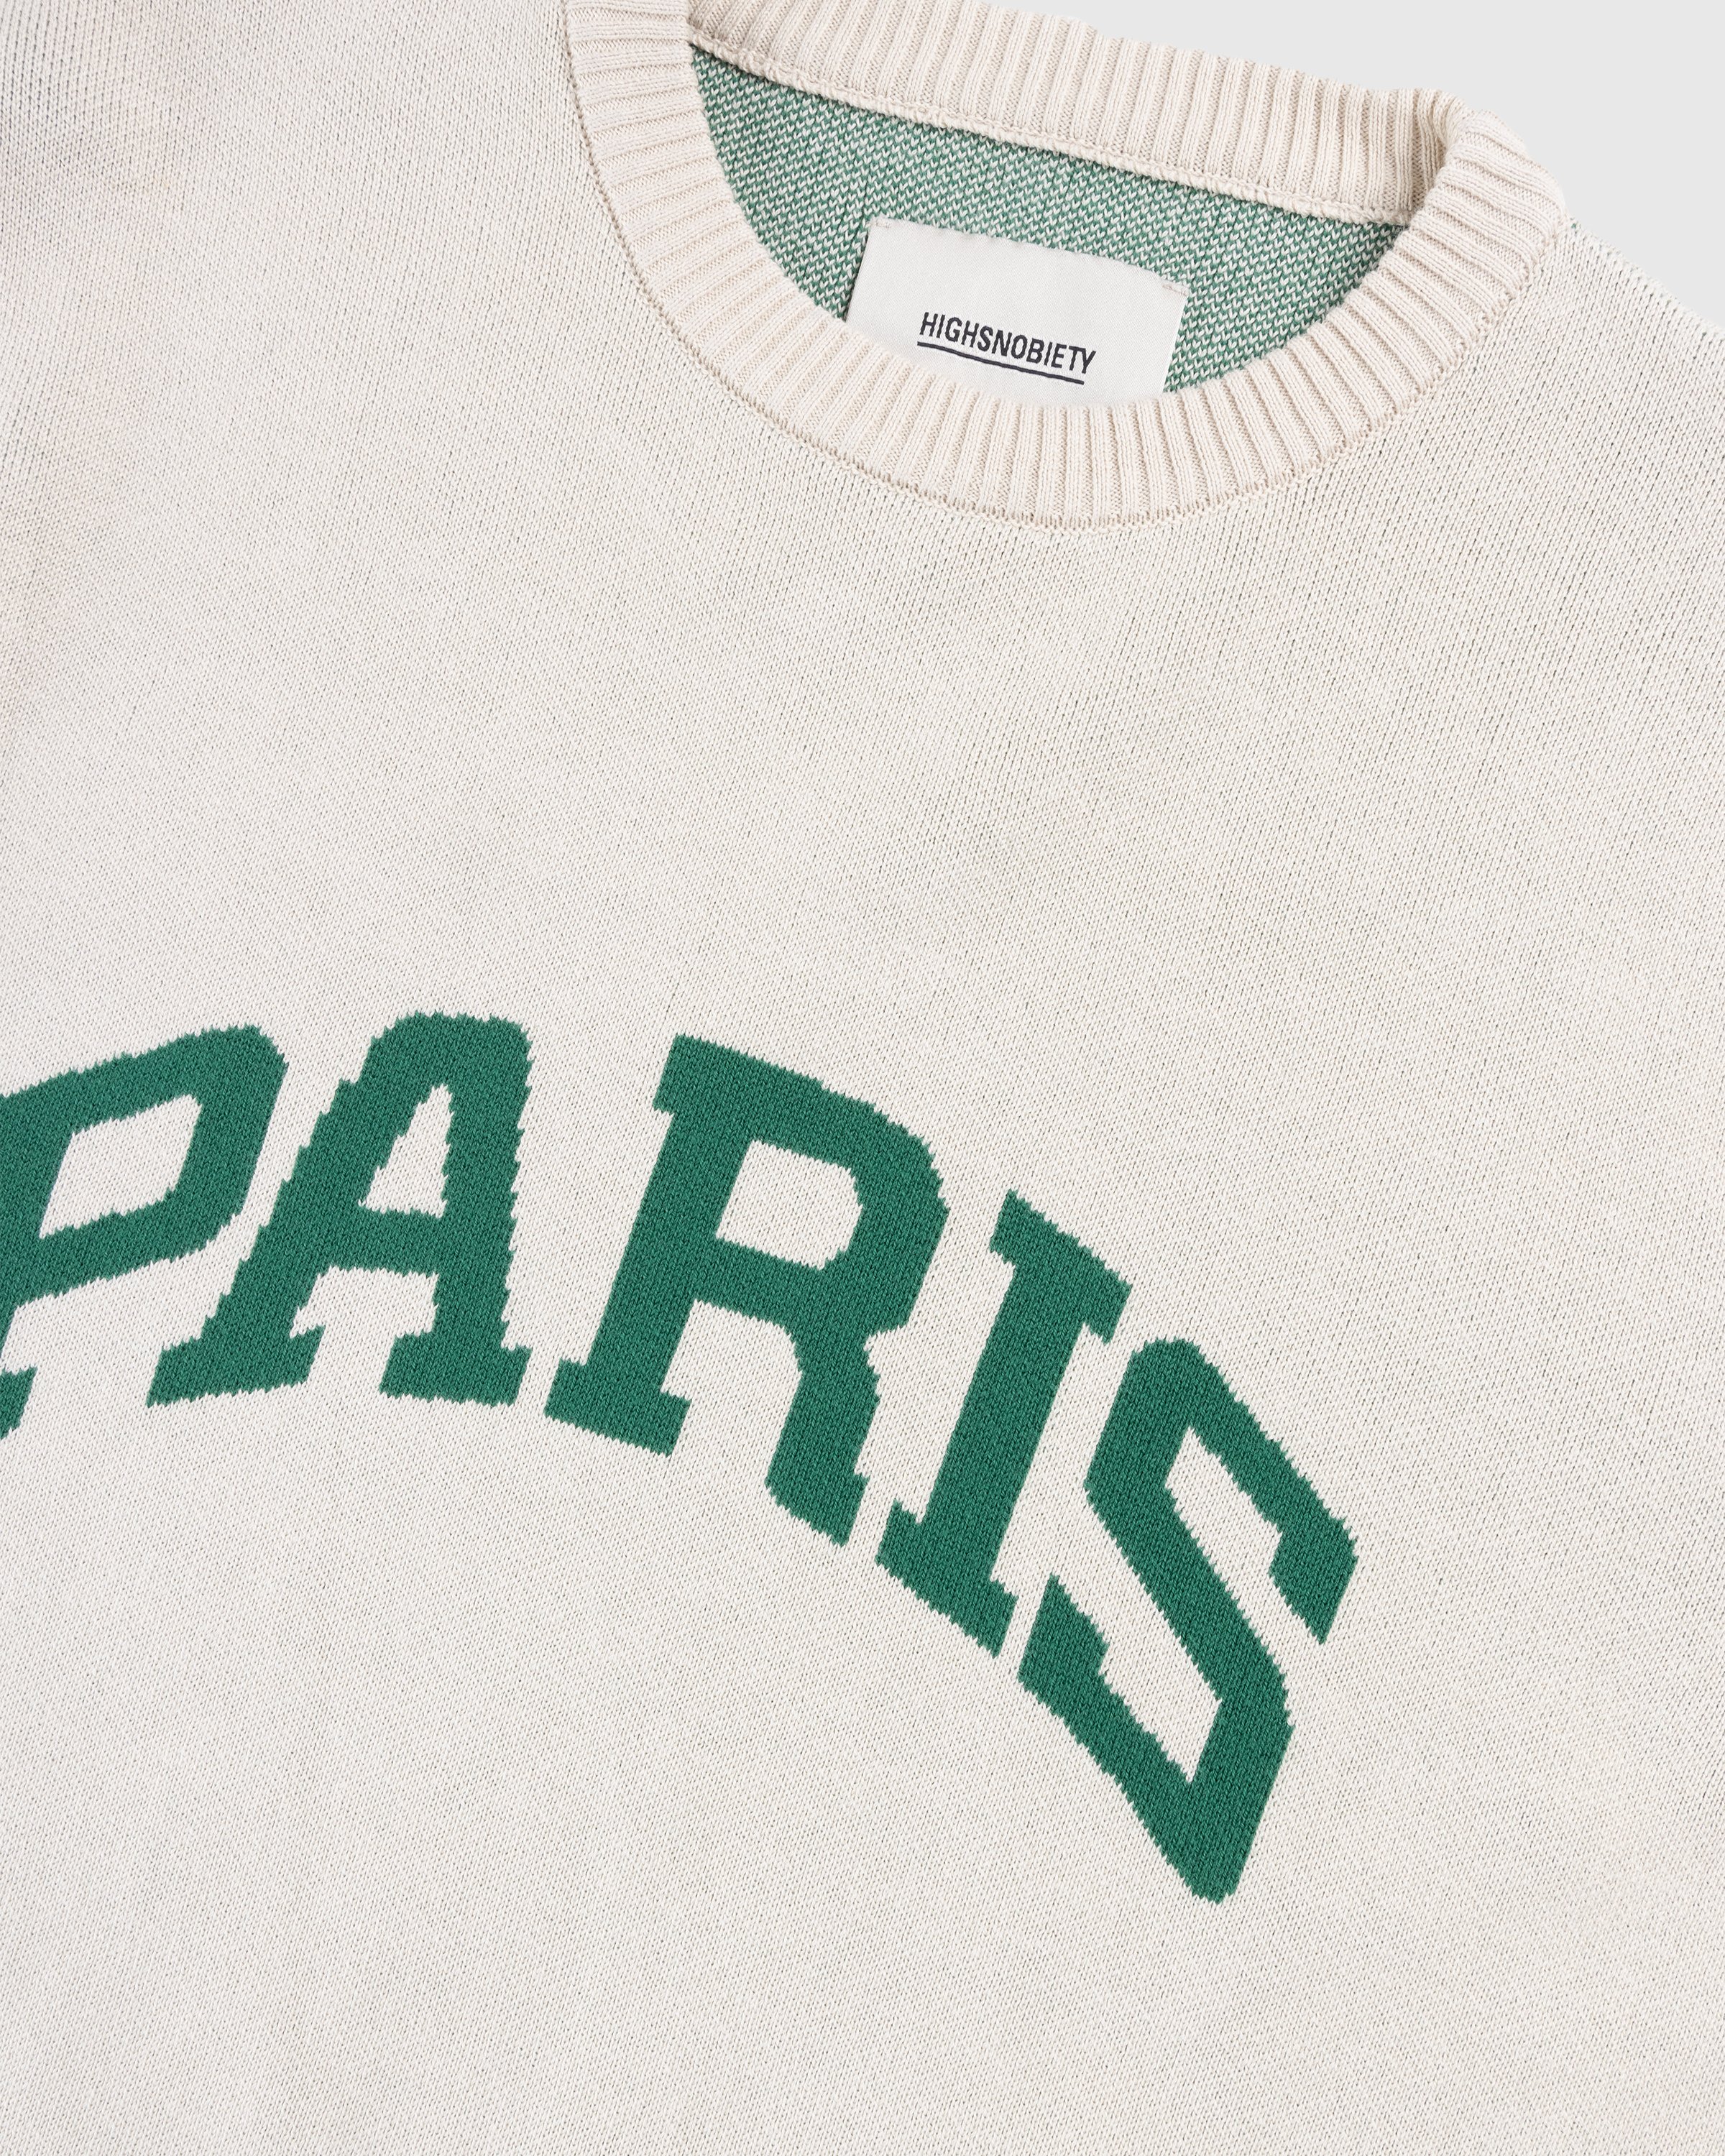 Highsnobiety - Not in Paris 5 Knitted Sweater - Clothing - Beige - Image 6